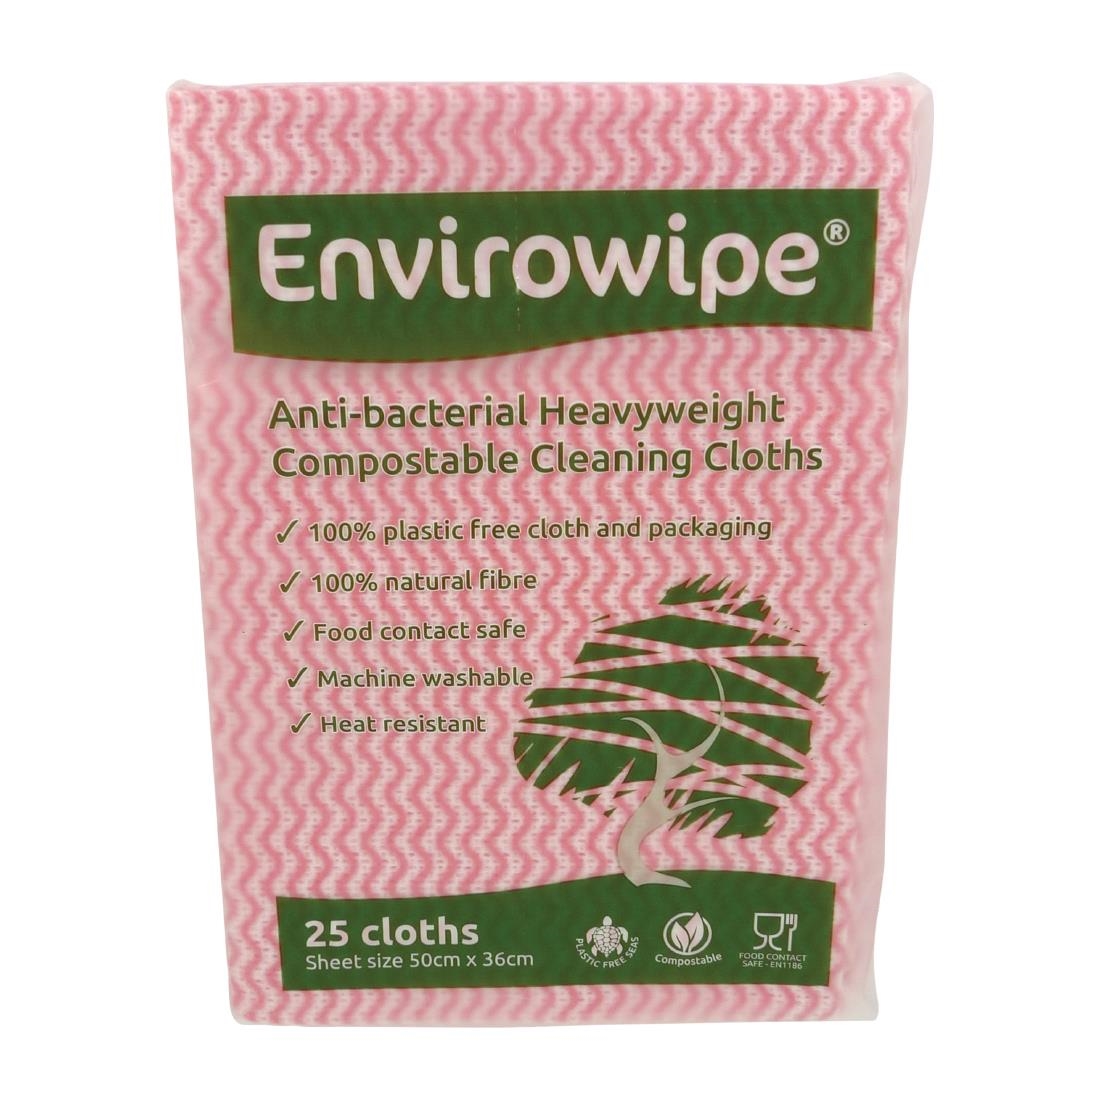 Envirowip anti-bac compostable cleaning cloths